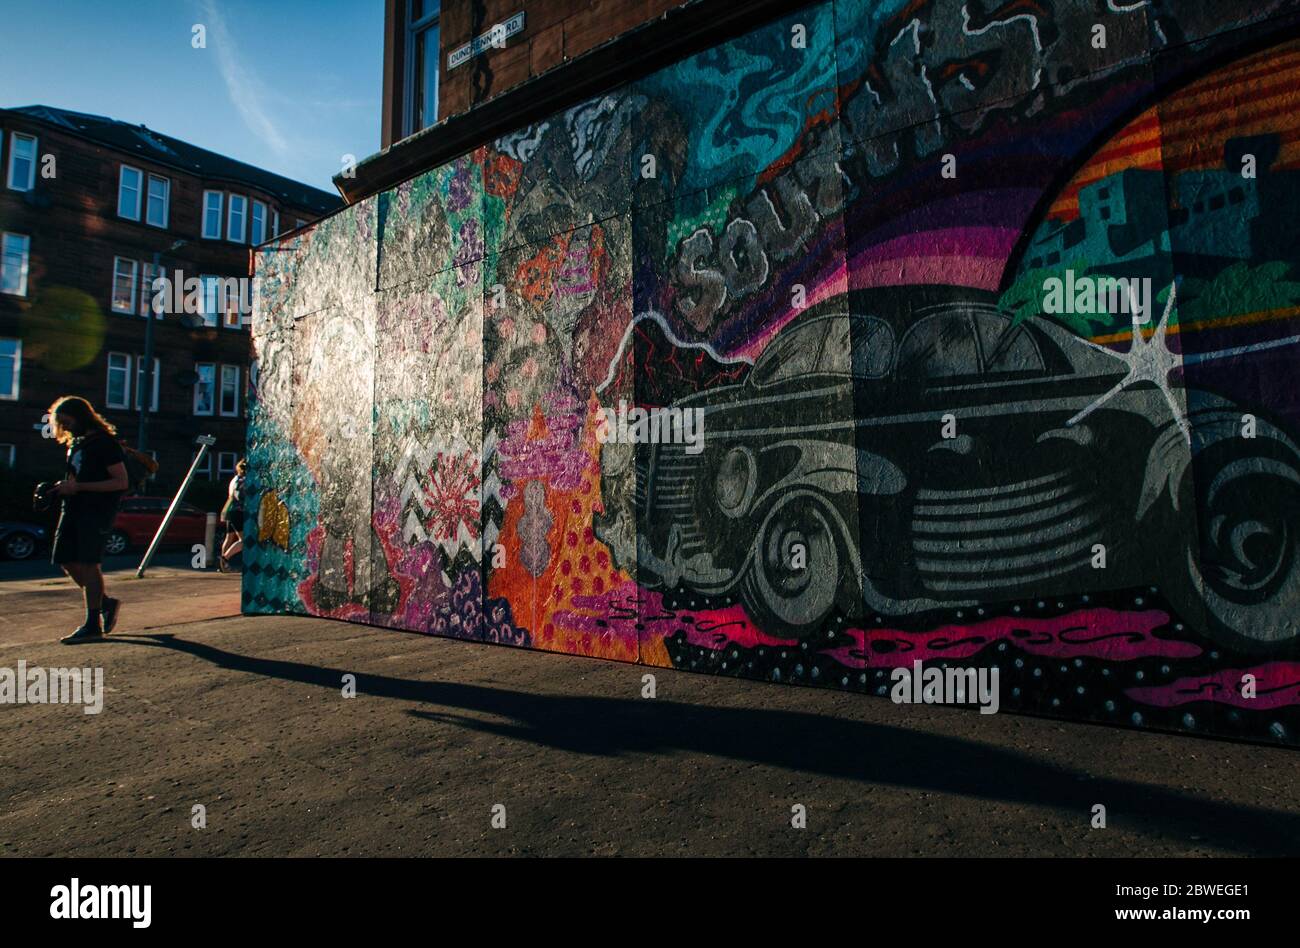 Graffiti mural in Southside area of Glasgow, by artist Taio. Stock Photo